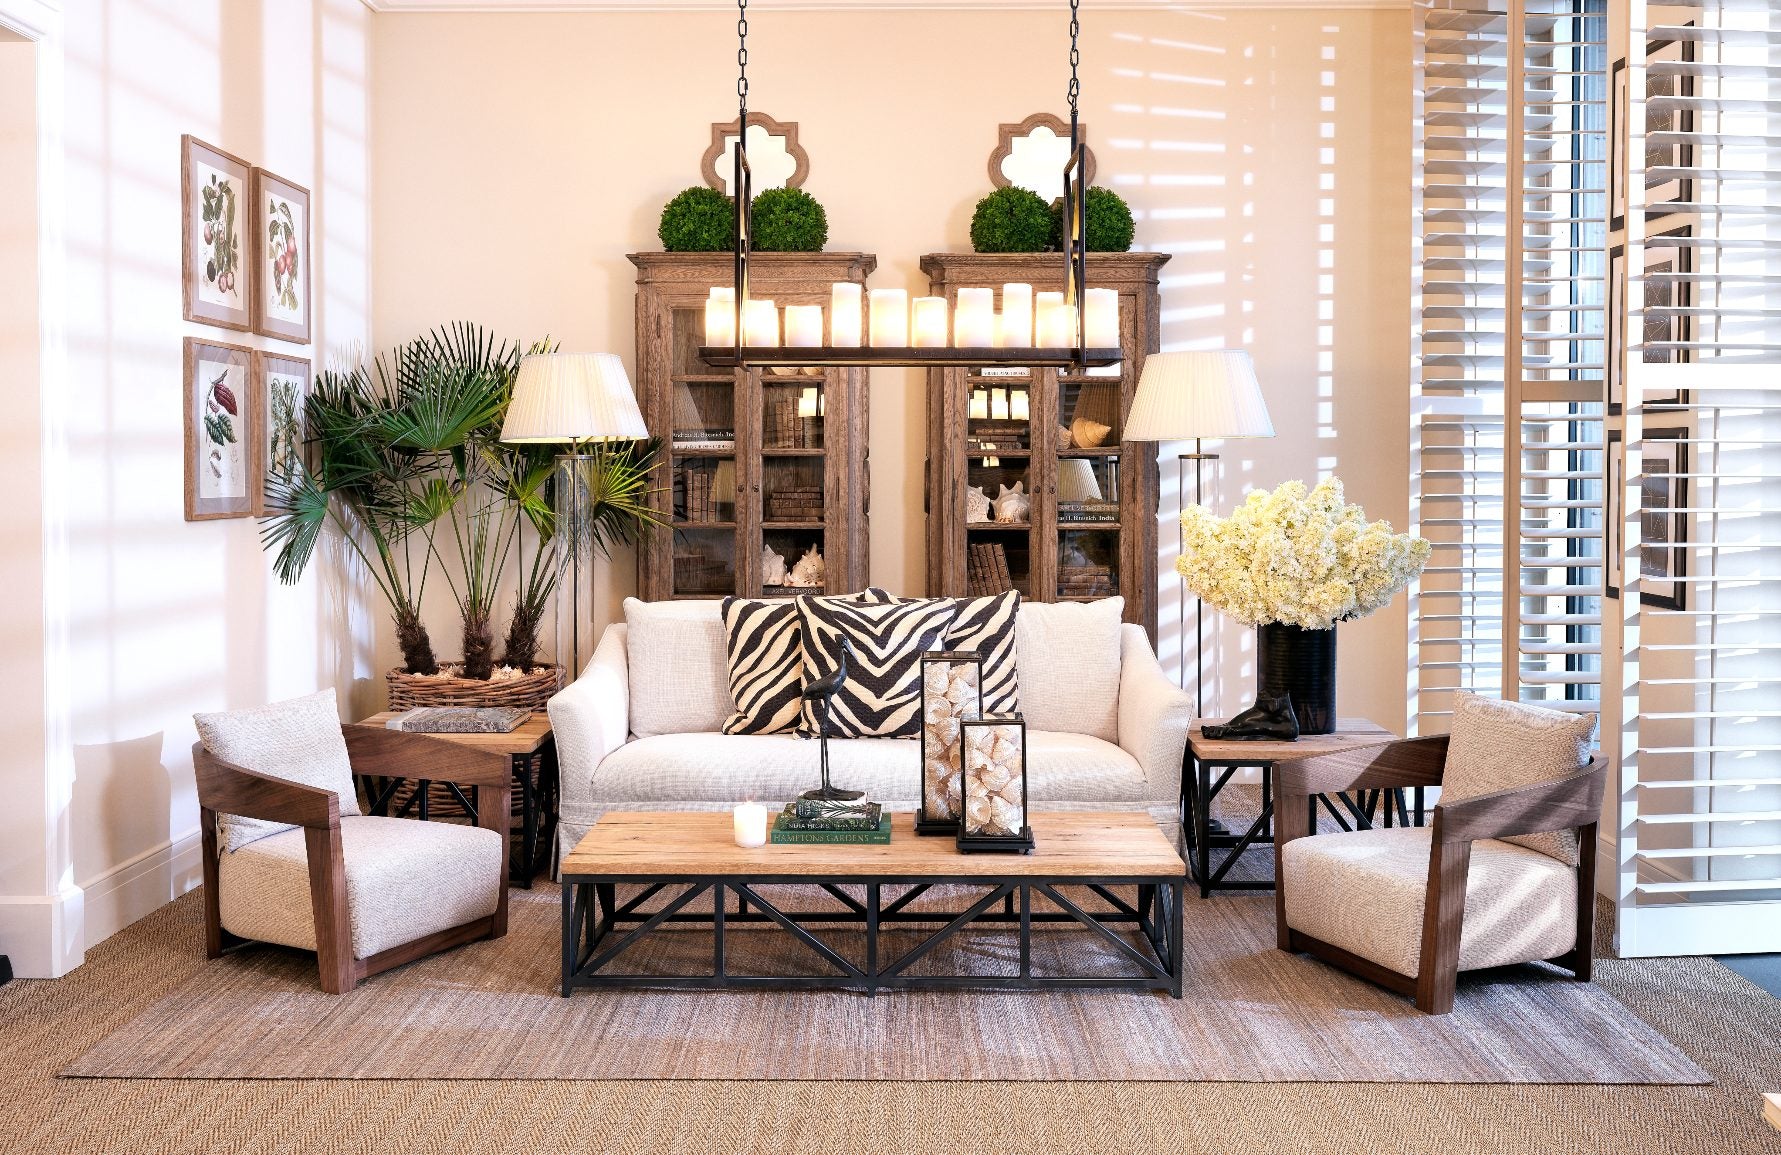 How To Decorate With Animal Print In Your Home LuxDecocom